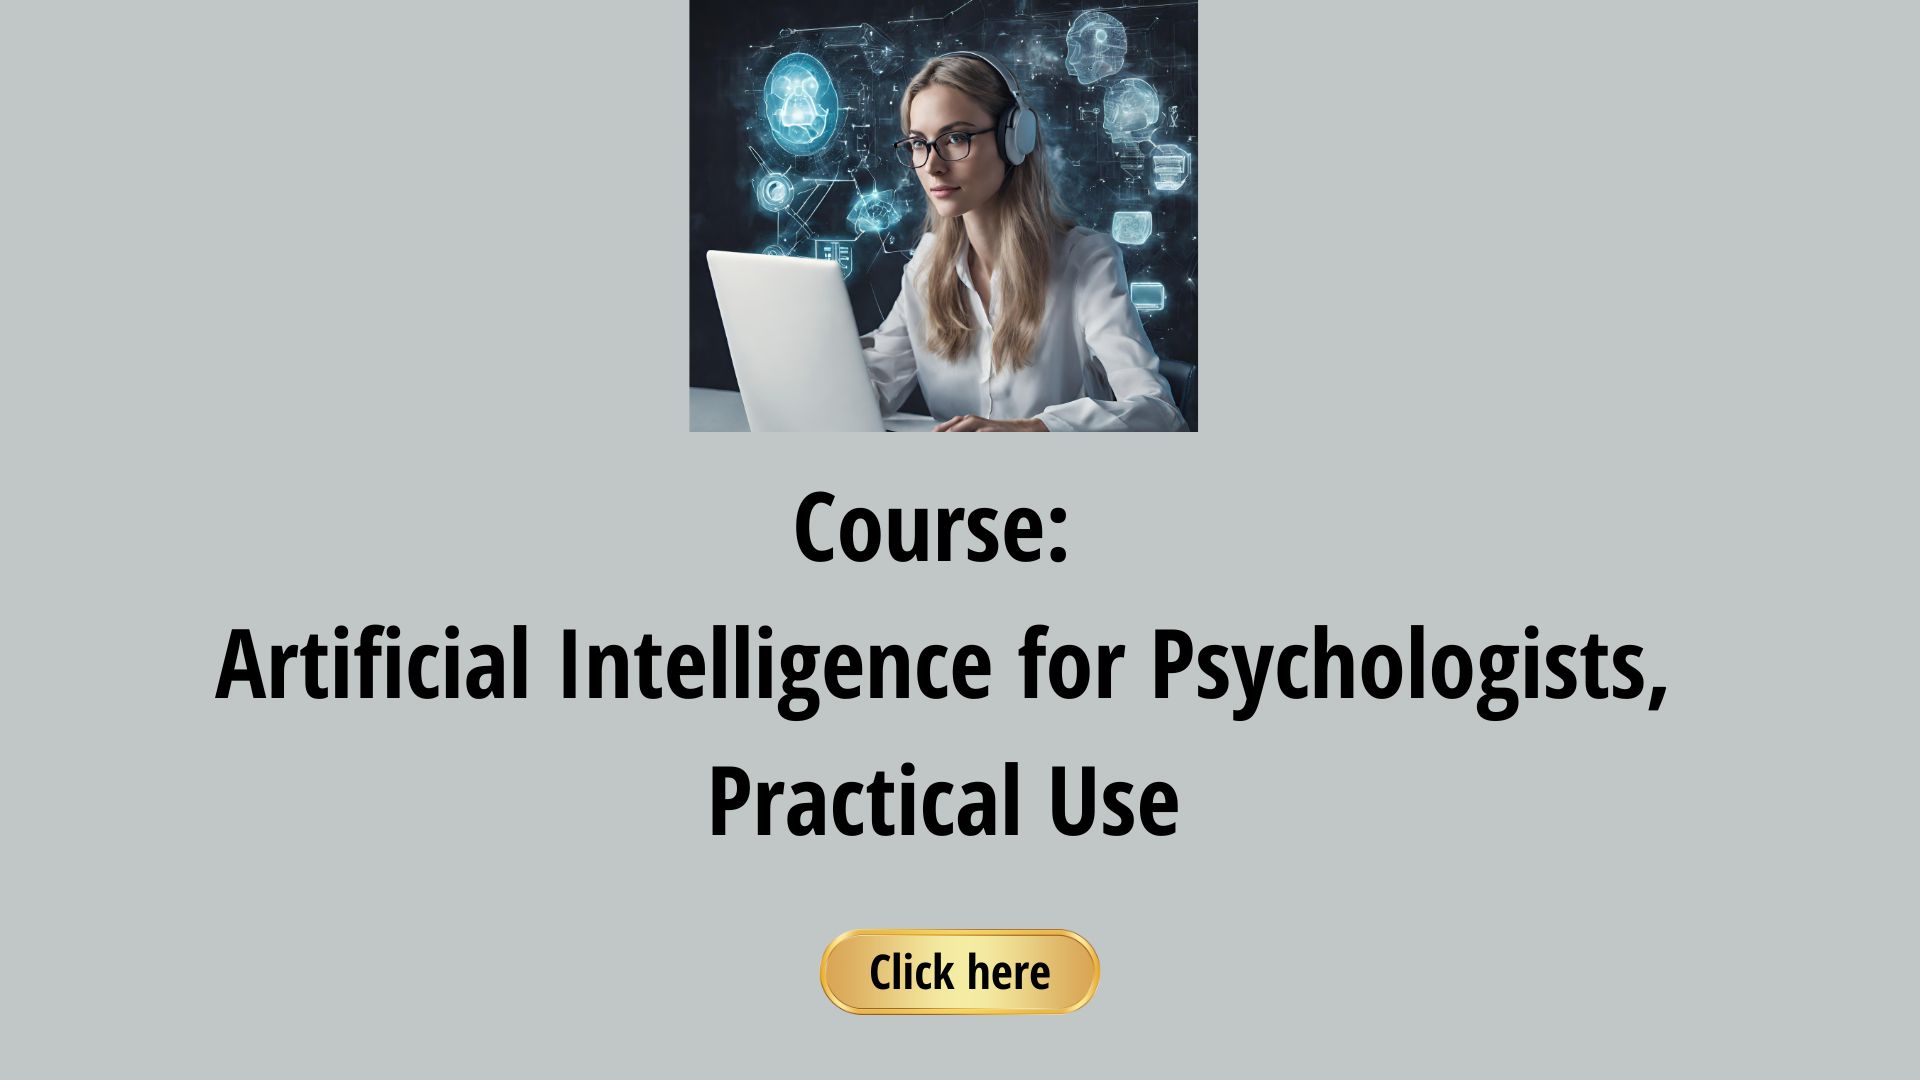 Course - Artificial Intelligence for Psychologists, Practical Use